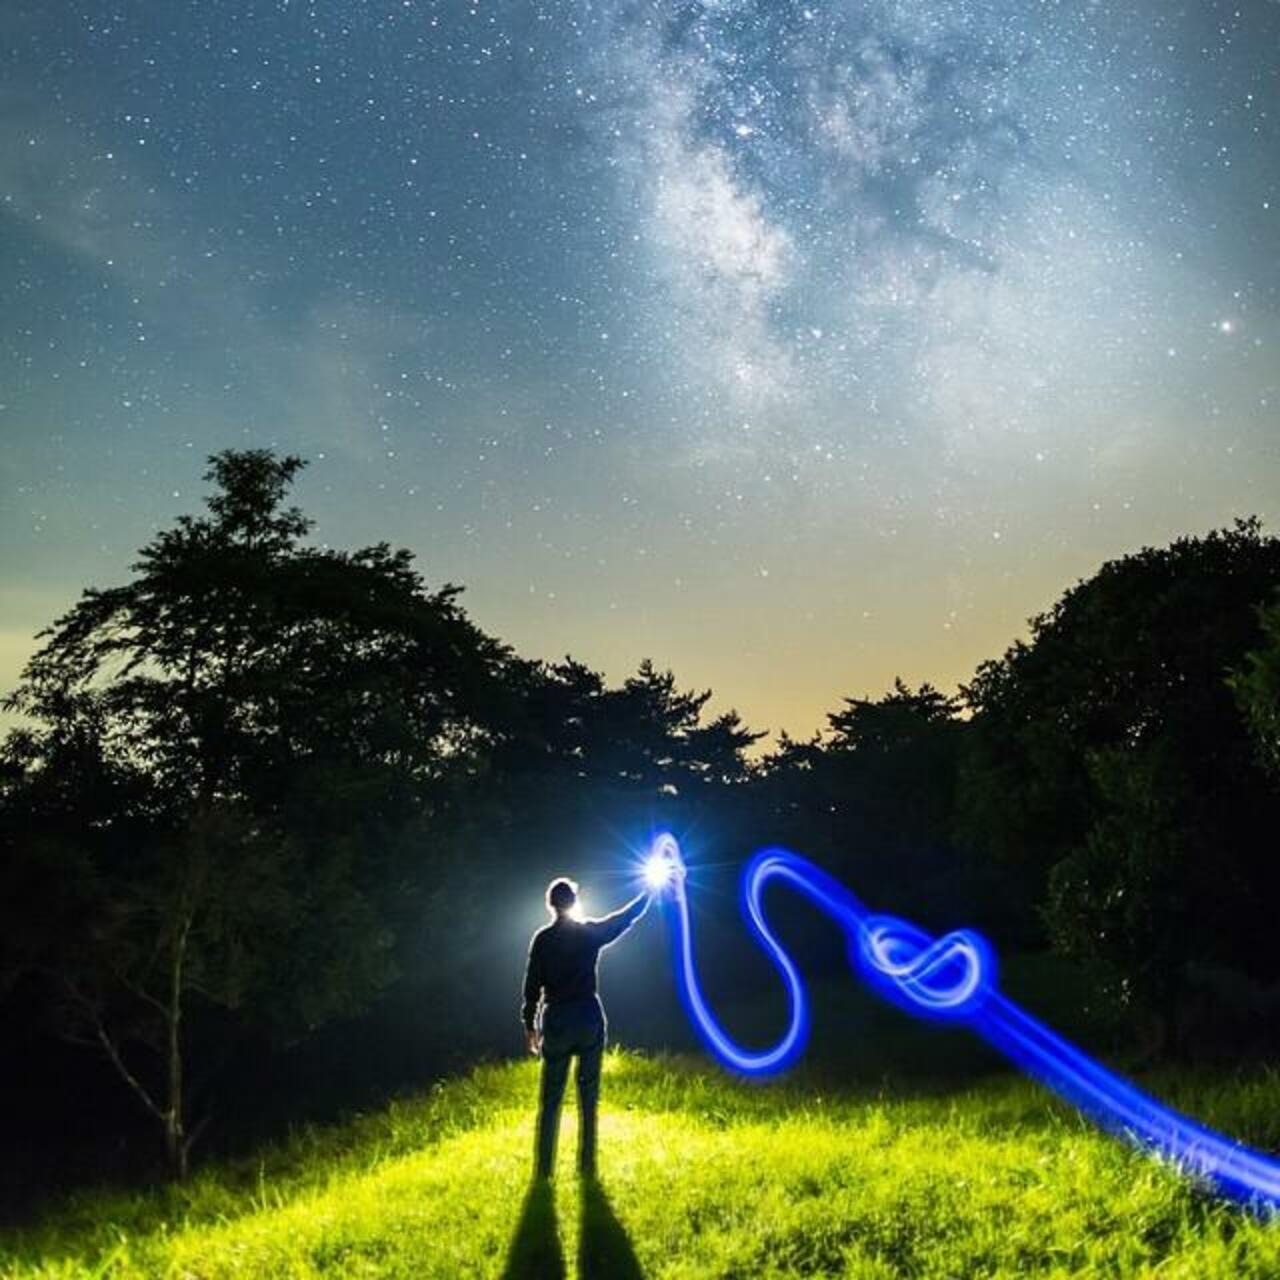 "All my life I've been a star, holding a light up in the dark"  Photo by Trevor Williams #kaskade #lightart #stayi… http://t.co/FK6Yo0orHD